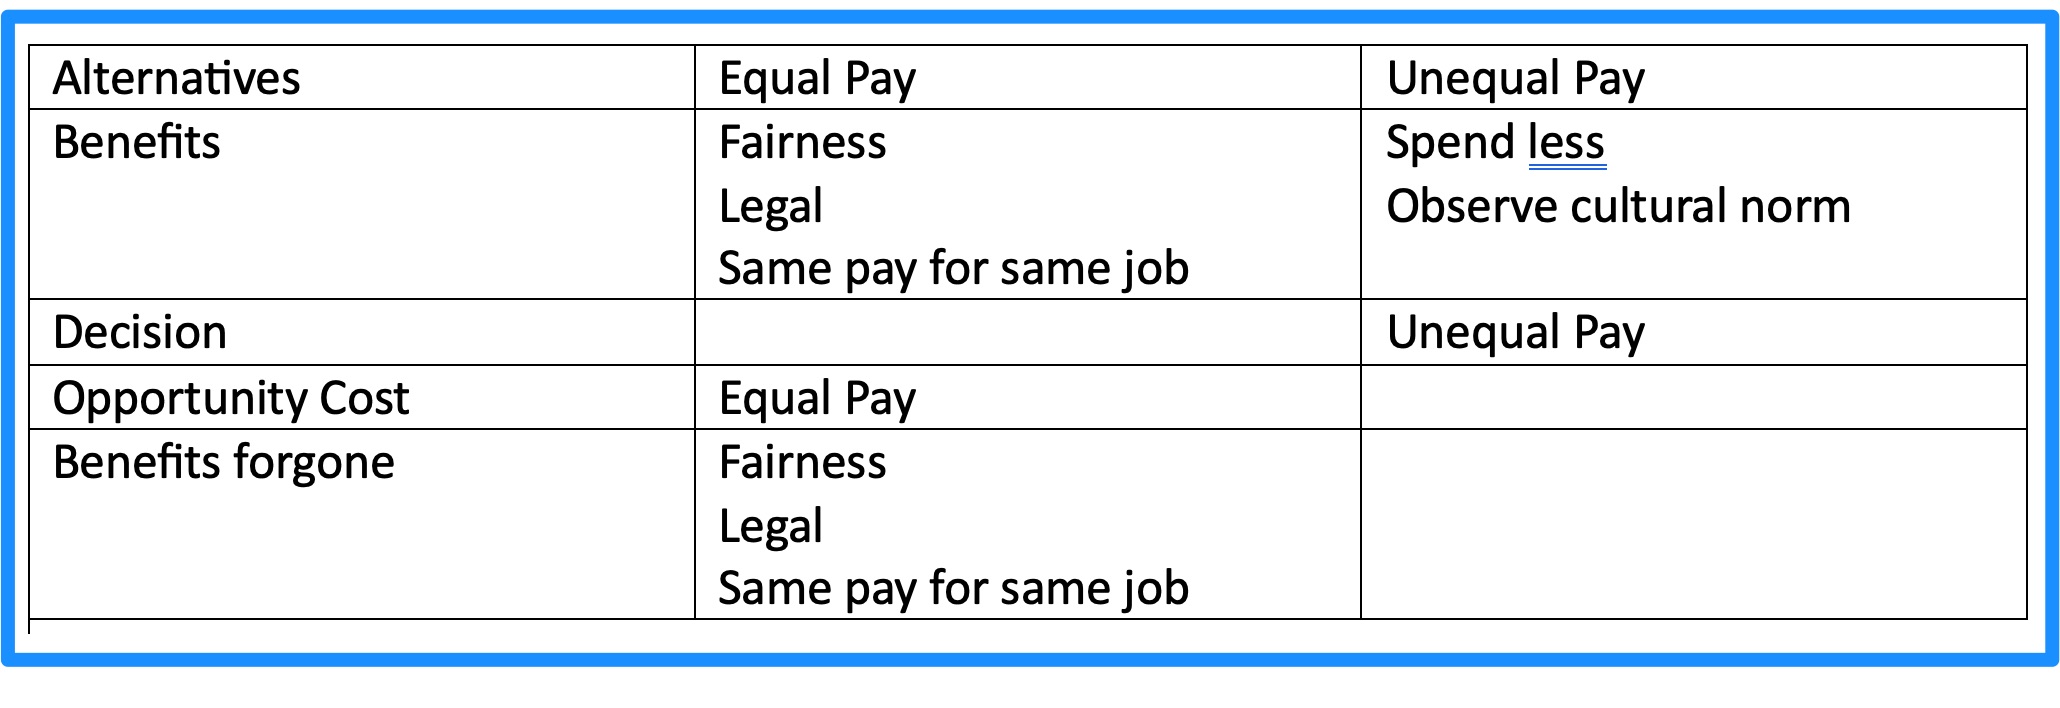 equal pay outlays